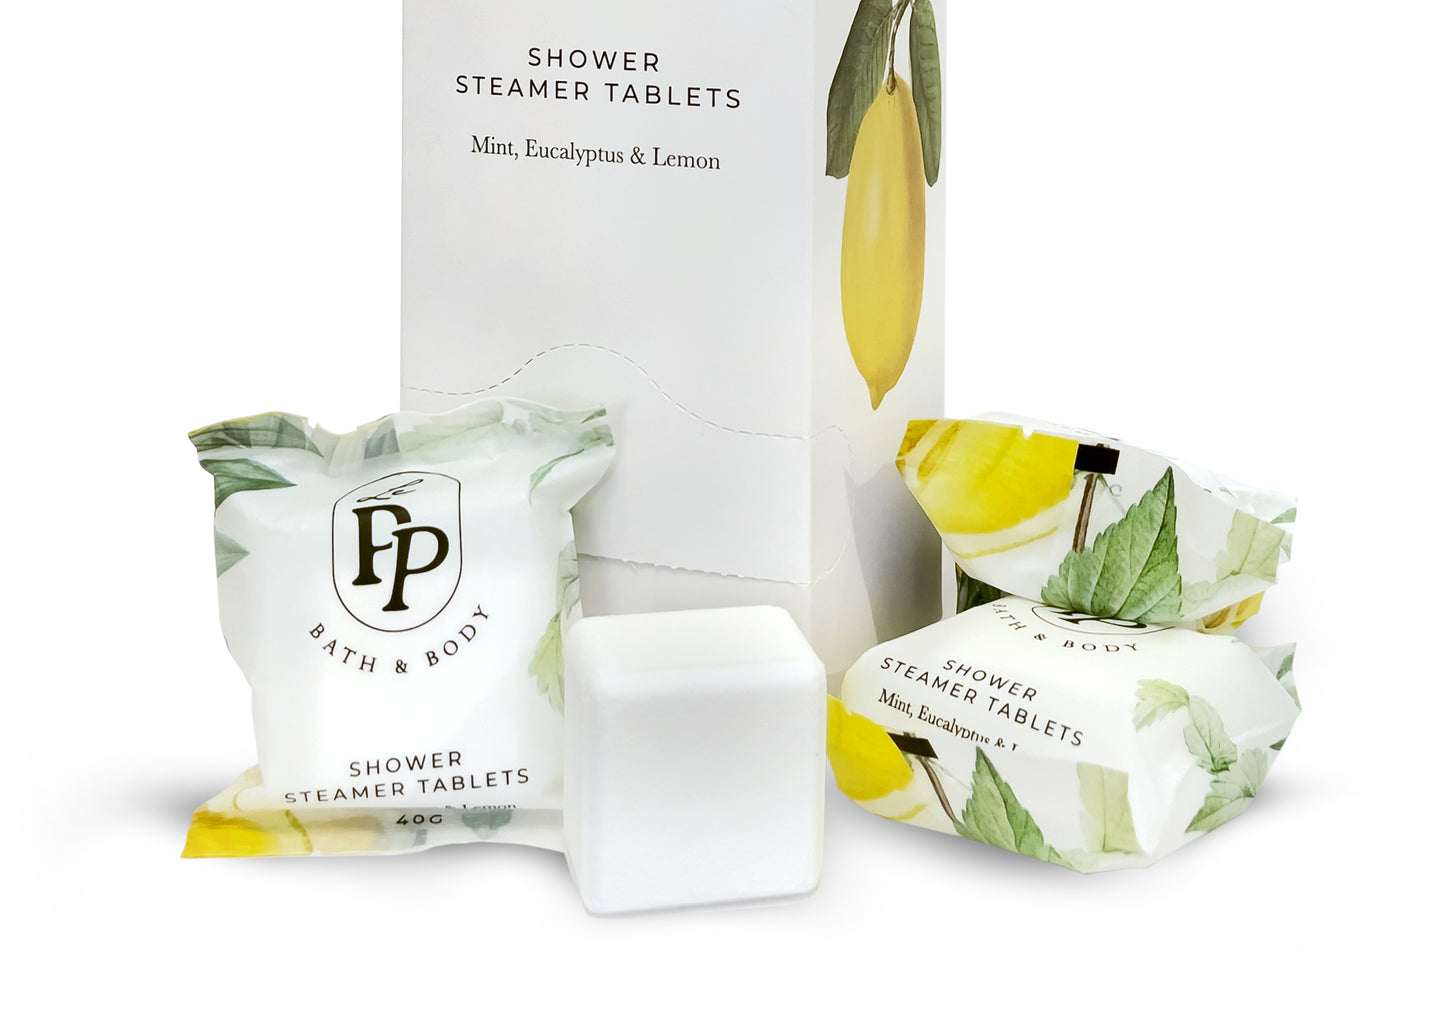 Le Petit Pendant Shower Steamers Aromatherapy, 10 Pack, Mint, Eucalyptus & Lemon Essential Oils, Self Care Routine, Stress Relief Gifts for Women & Men